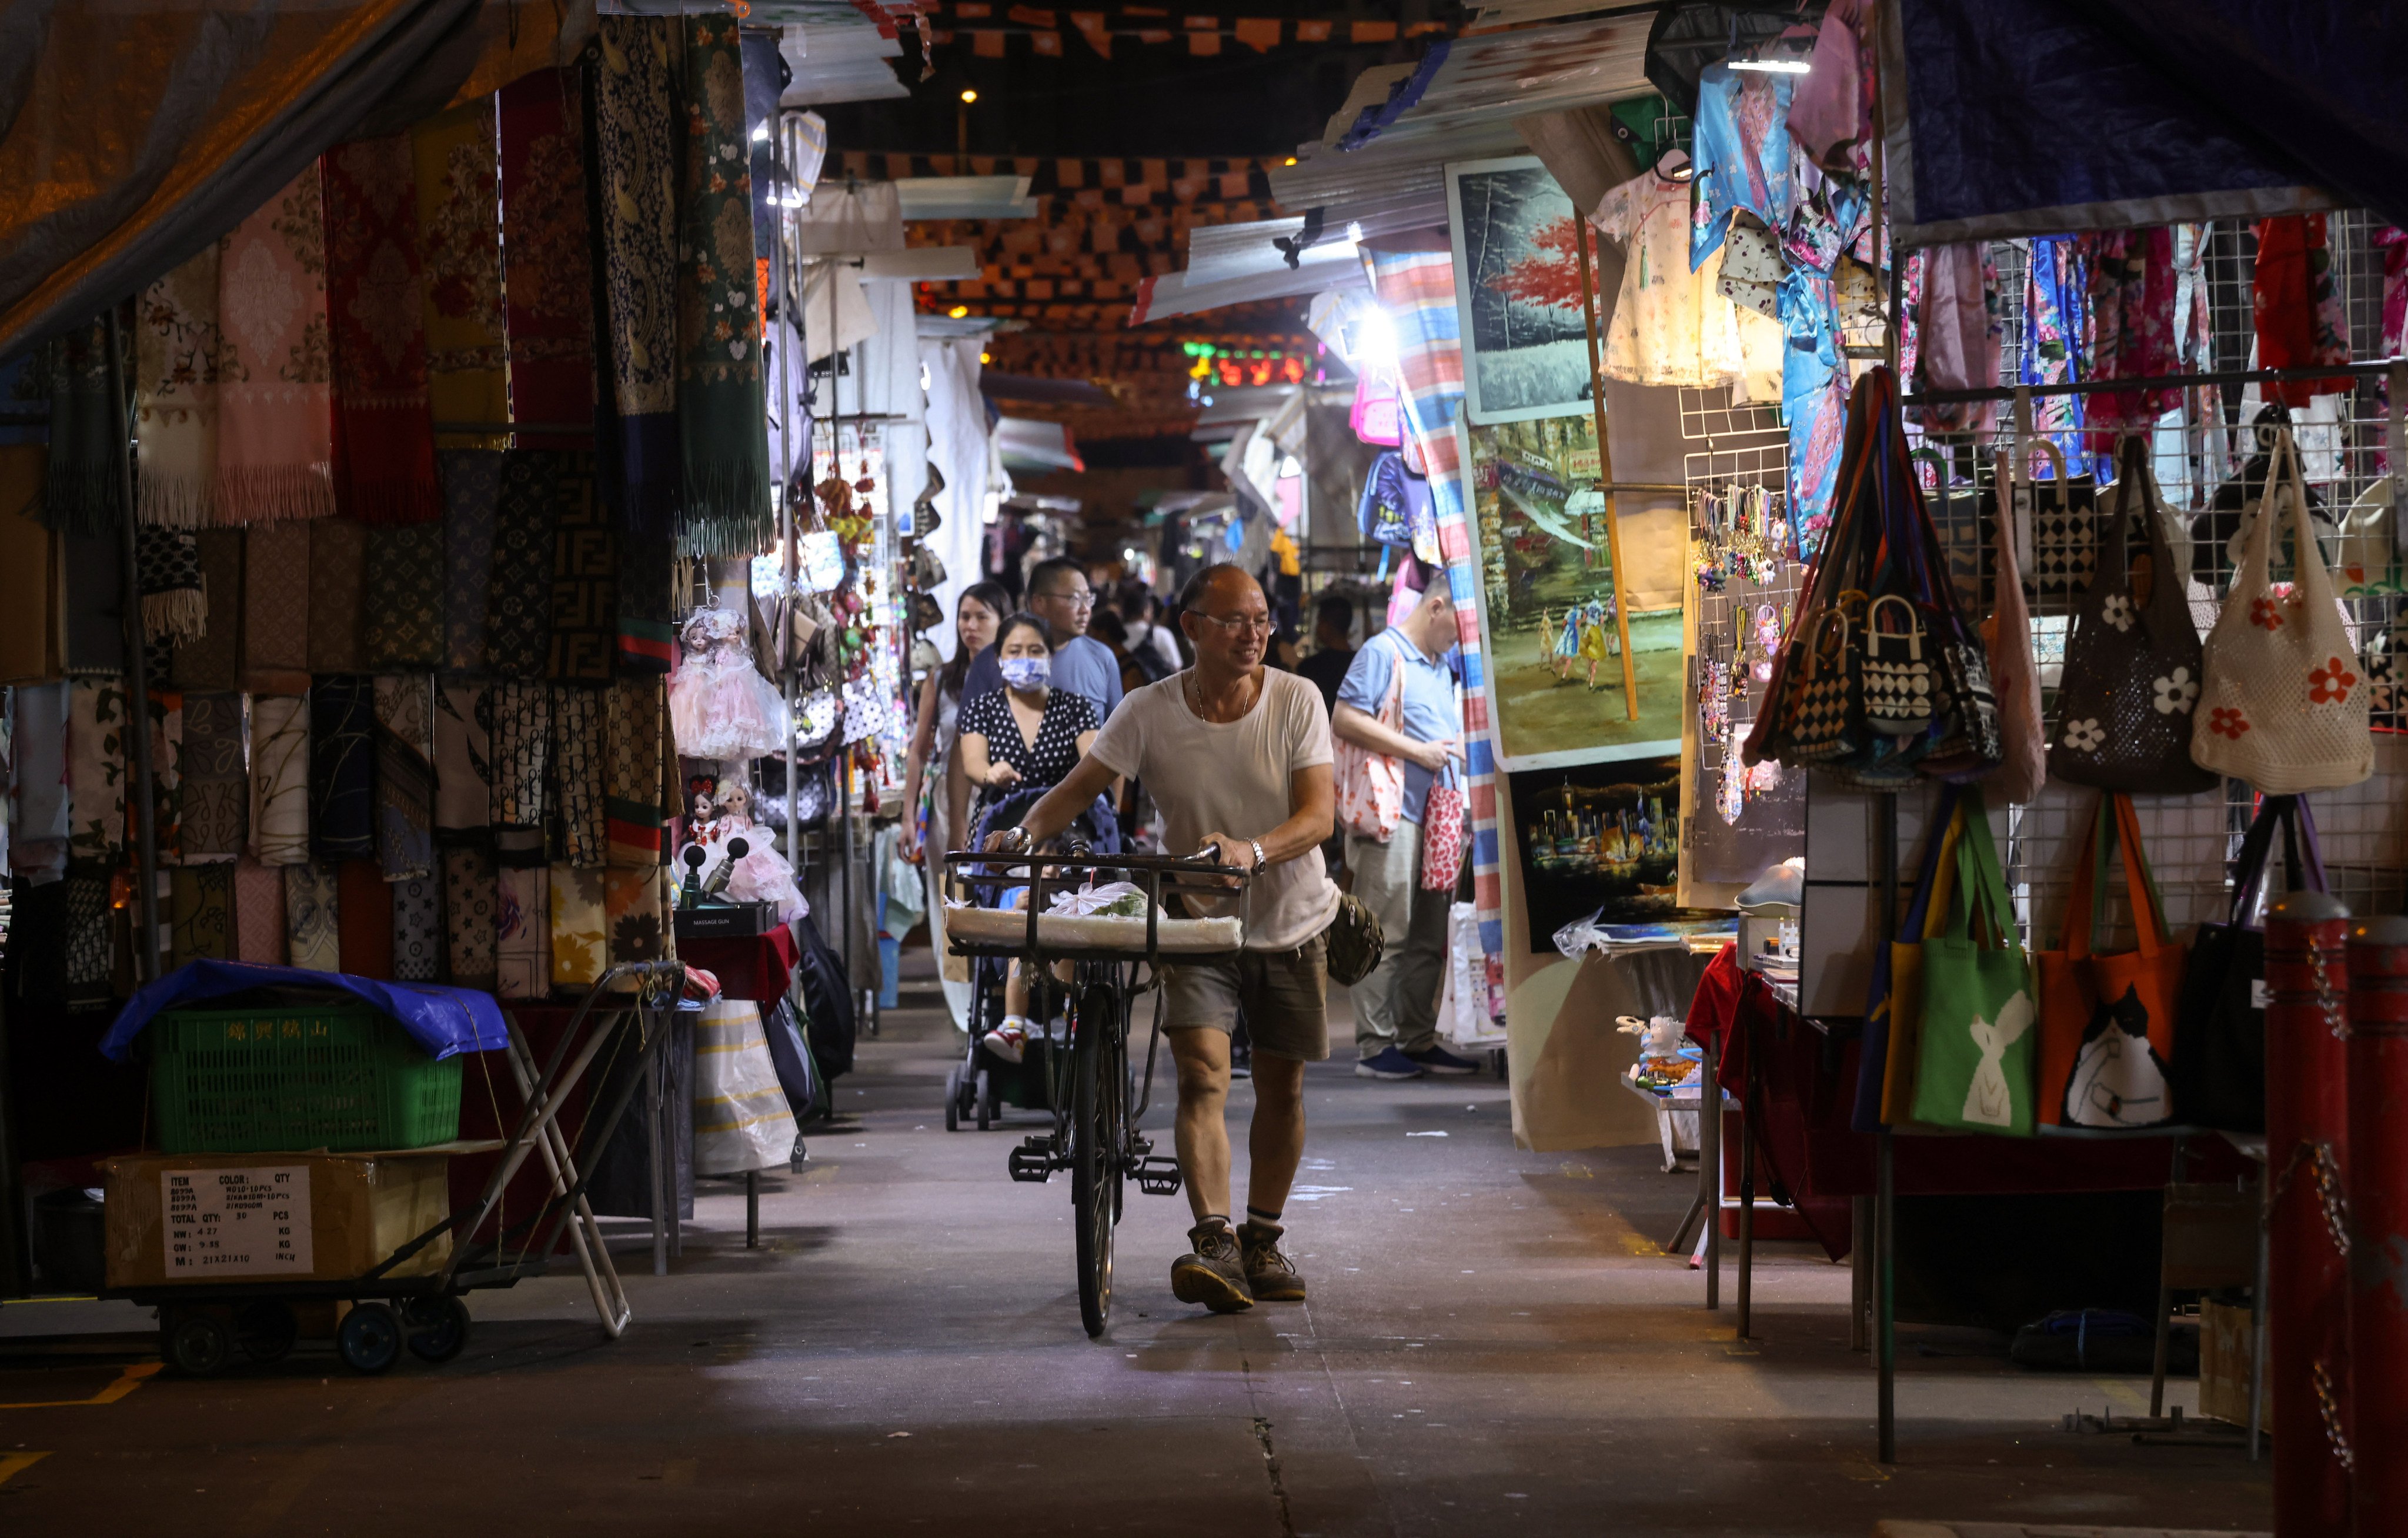 Temple Street night market in Yau Ma Tei on August 28. Expanding night markets has been raised as one potential way to revive Hong Kong’s nighttime economy. Photo: Jonathan Wong